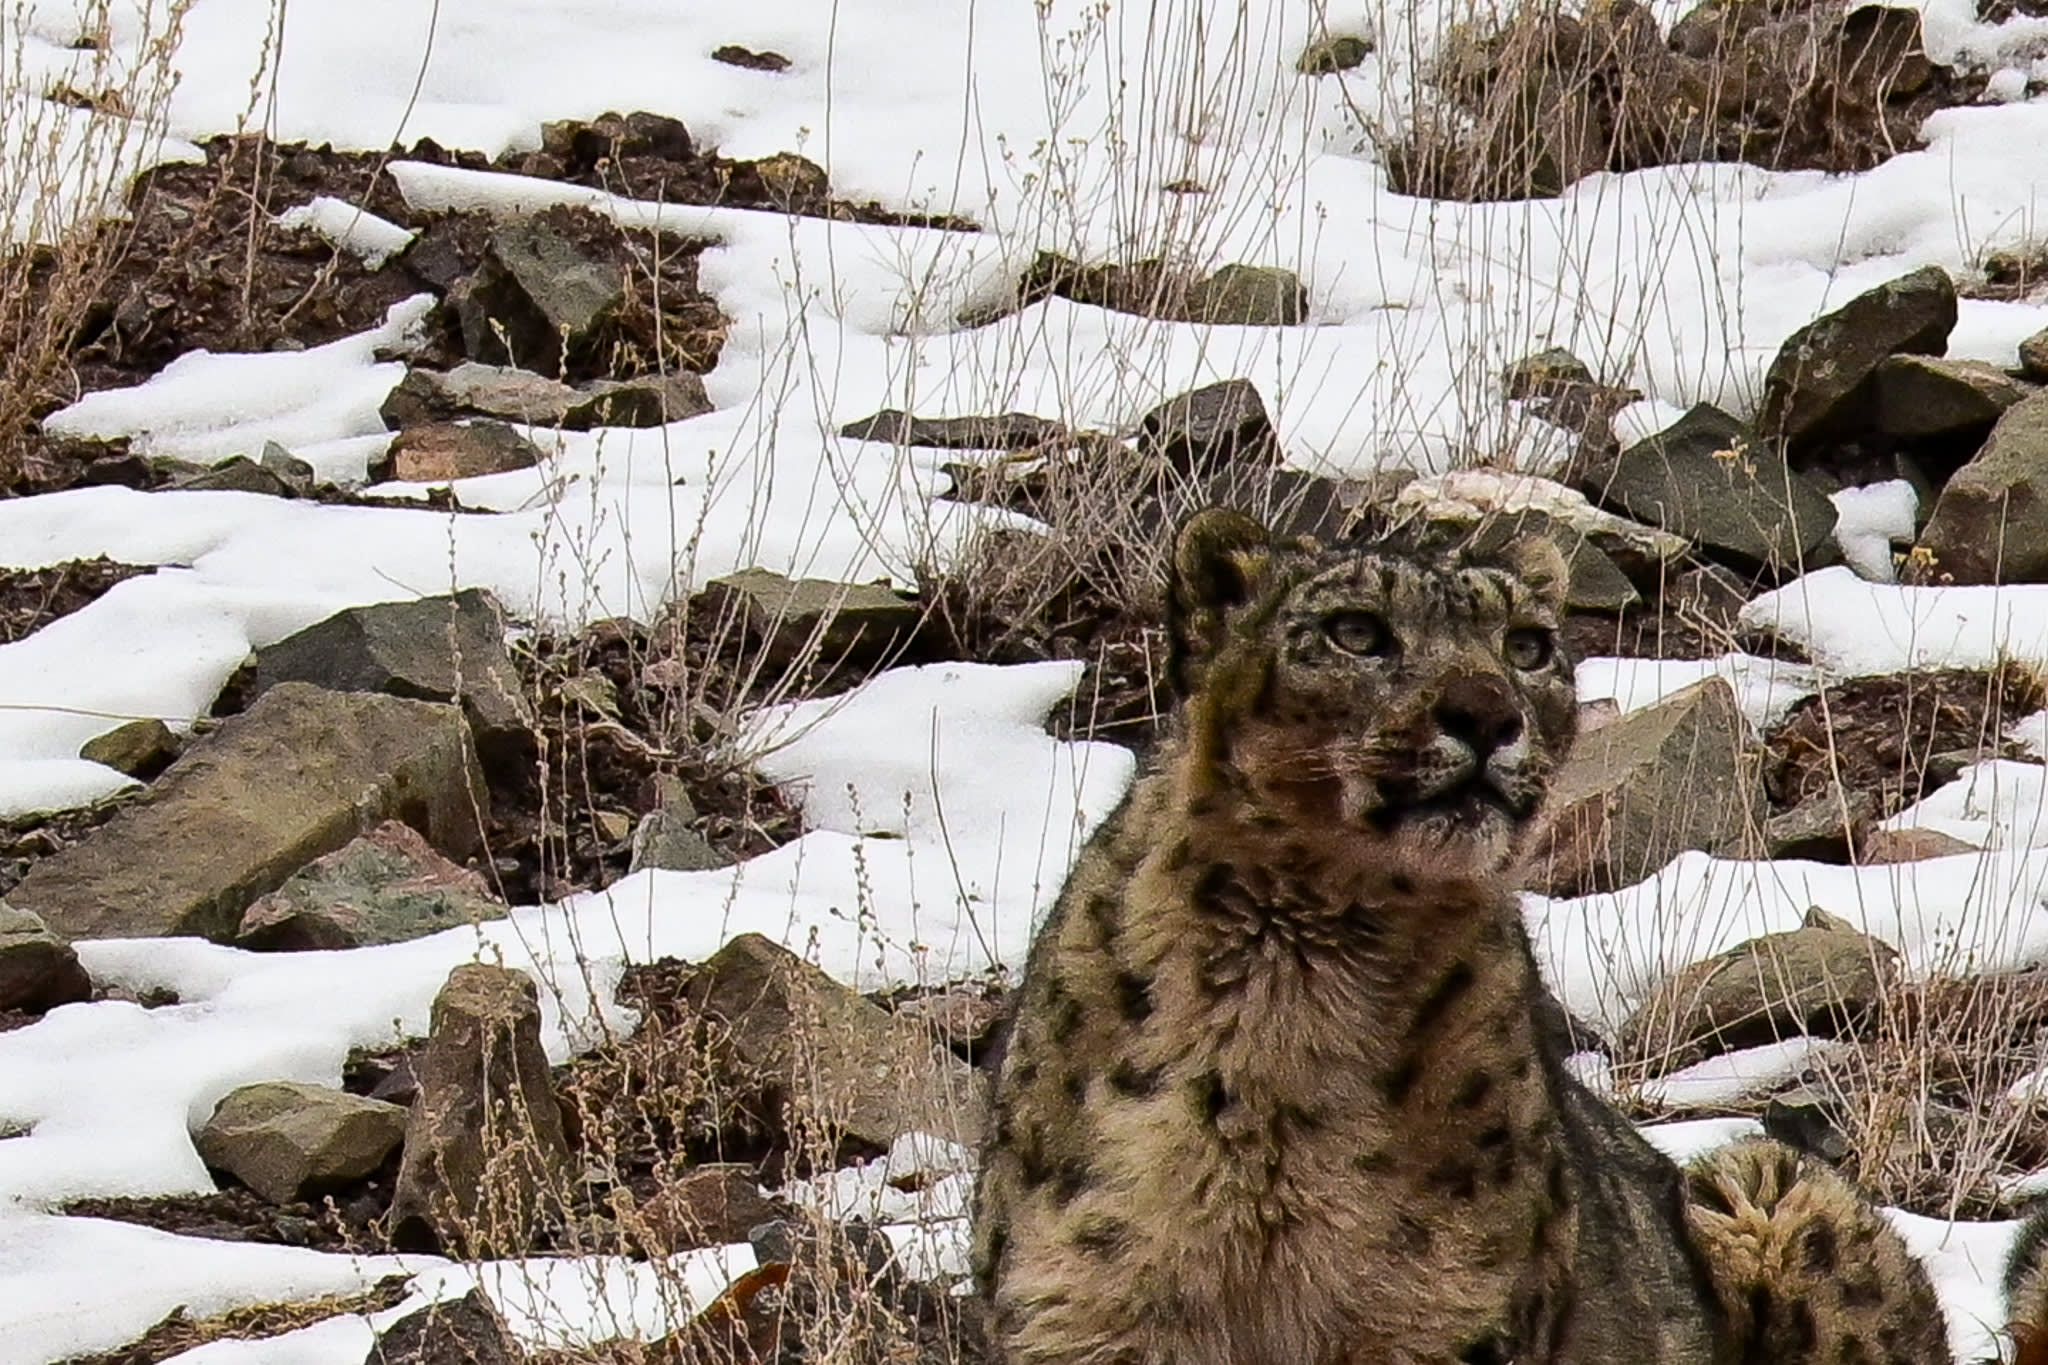 Join Valerie Parkinson on her search for snow leopards in the Himalaya 